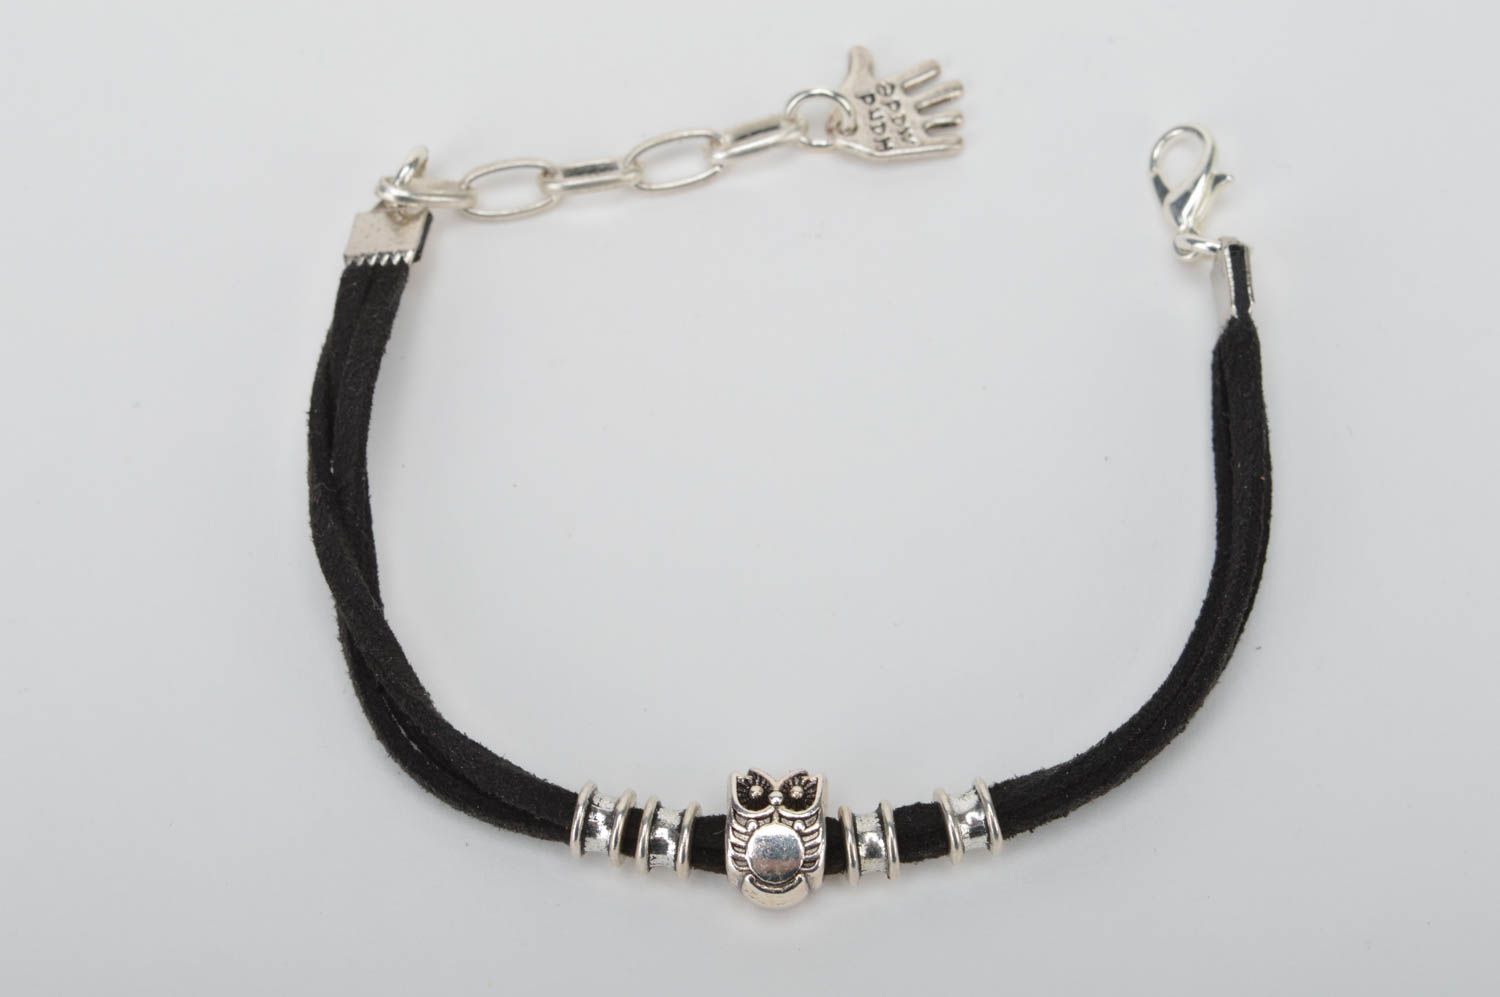 Handmade black cute bracelet made of suede laces with charms made of metal photo 5